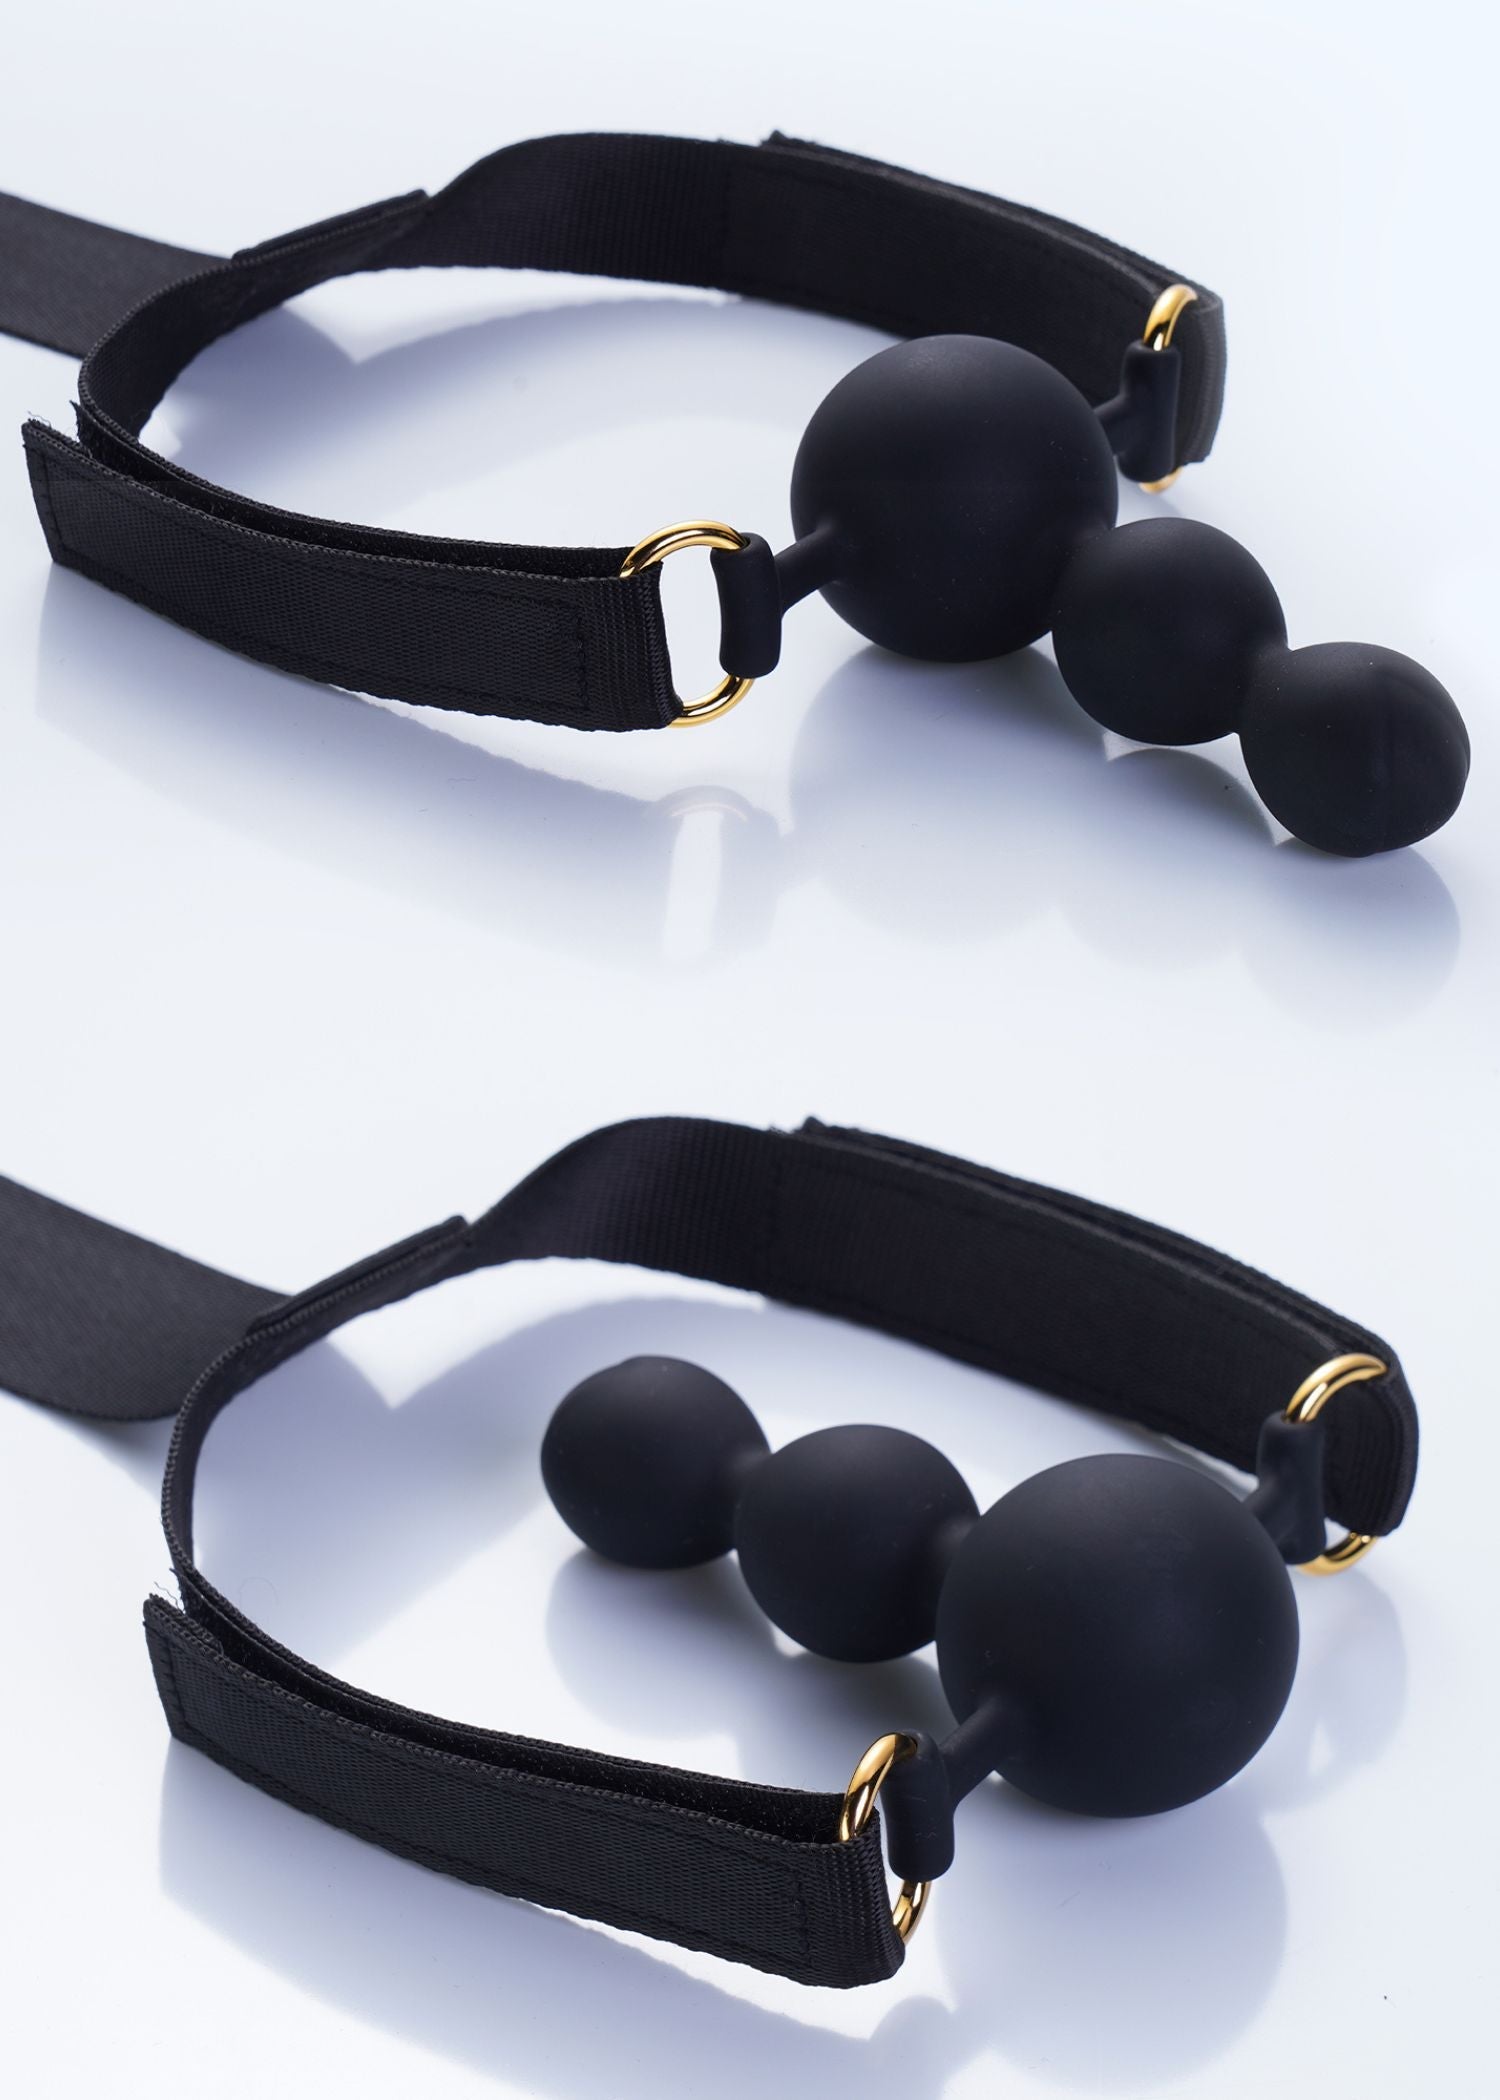 Binding Cuffs with Gag Ball (Black) | Avec Amour